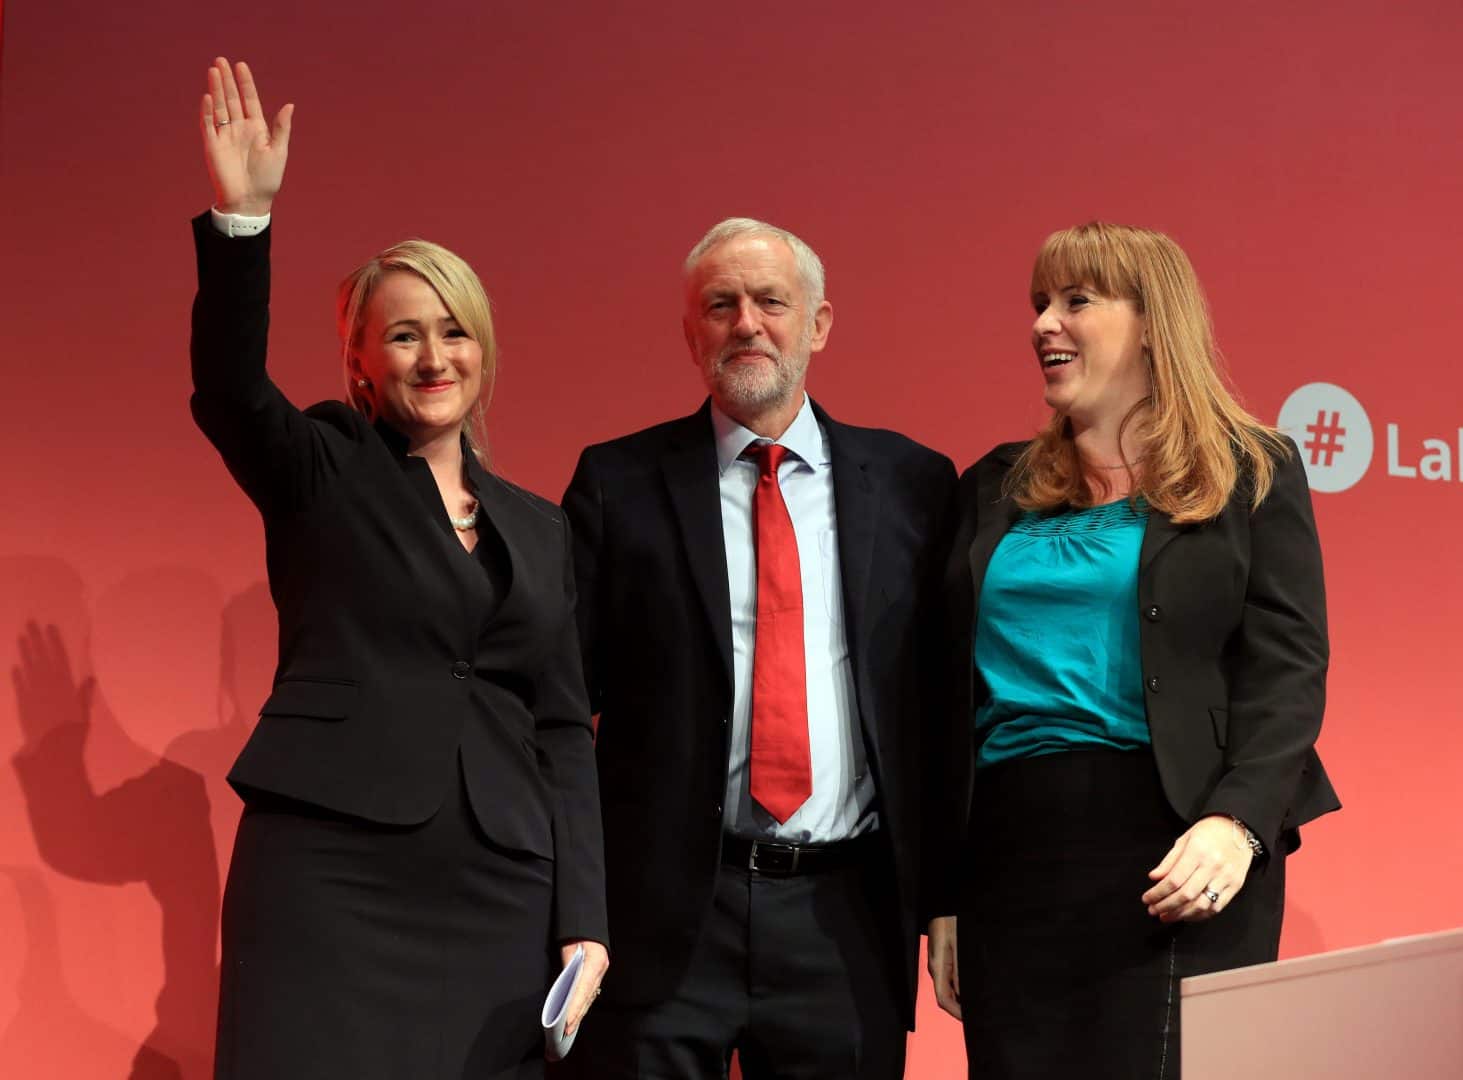 Angela Rayner backs favourite Rebecca Long-Bailey as Labour leader as Sadiq Khan says he’s focussing on Mayoral election